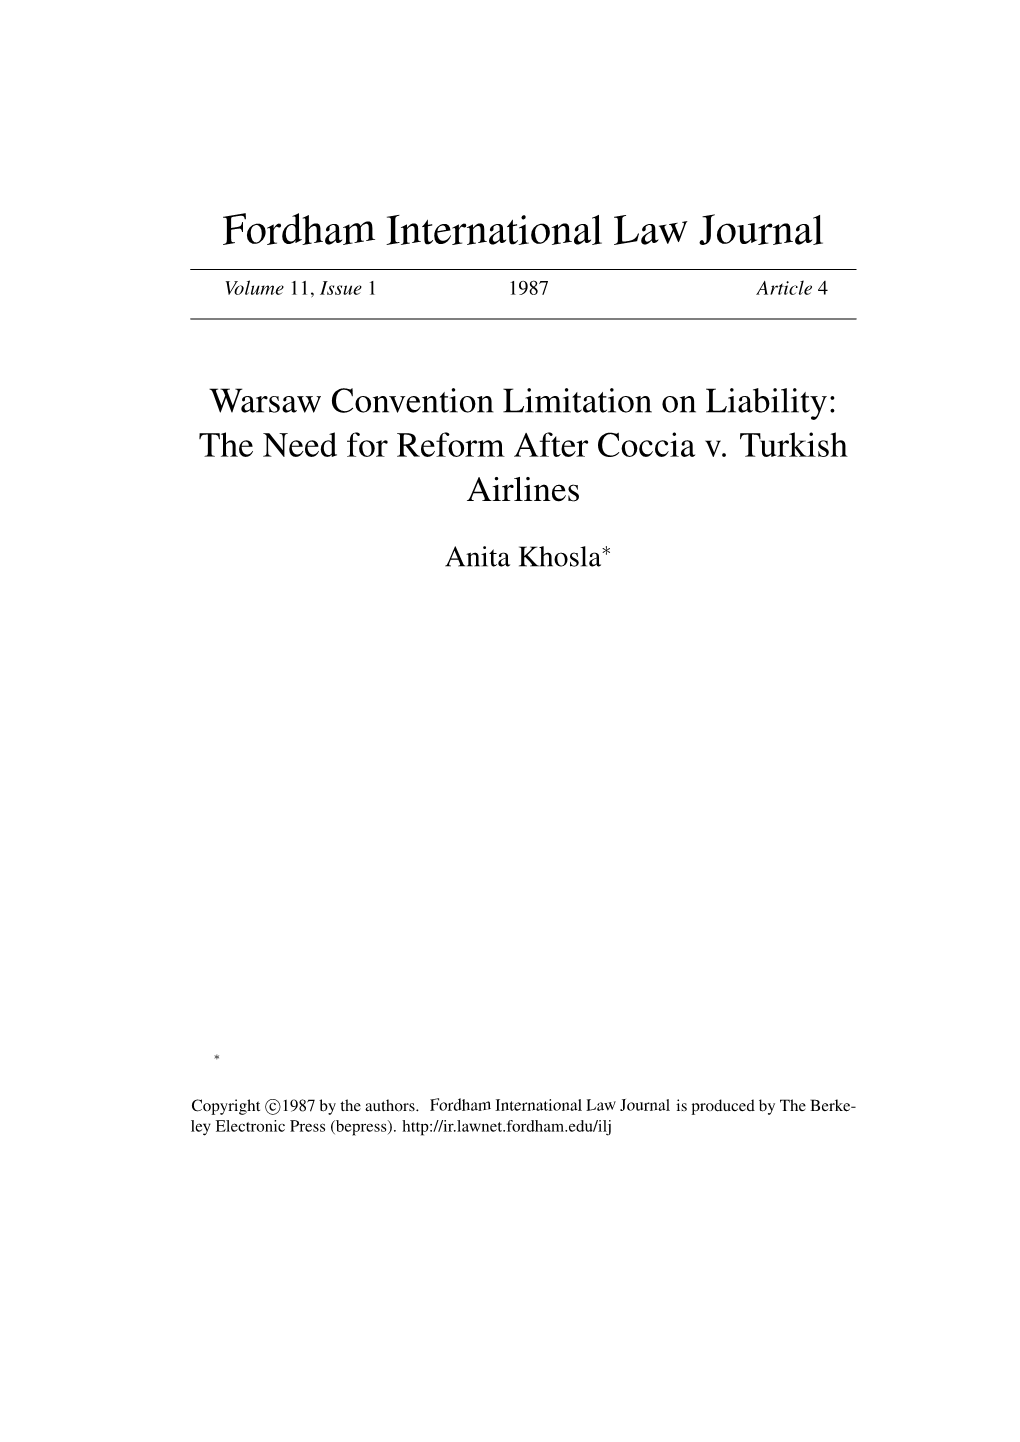 Warsaw Convention Limitation on Liability: the Need for Reform After Coccia V